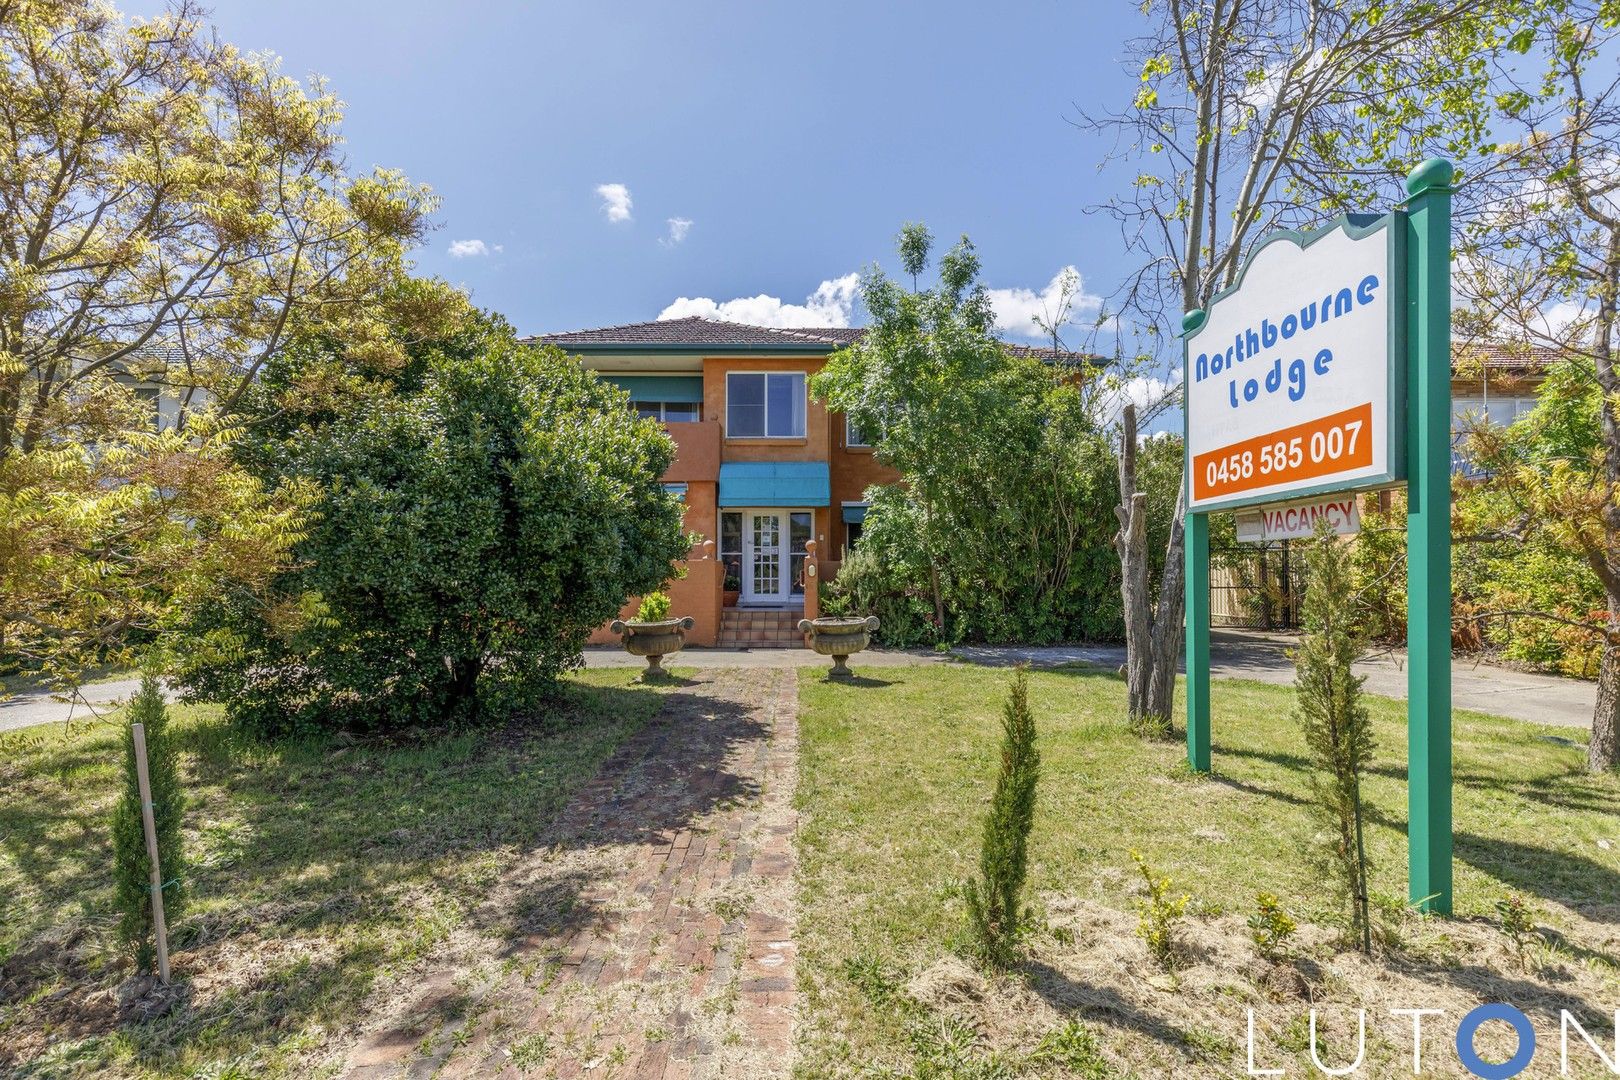 522 Northbourne Avenue, Downer ACT 2602, Image 0